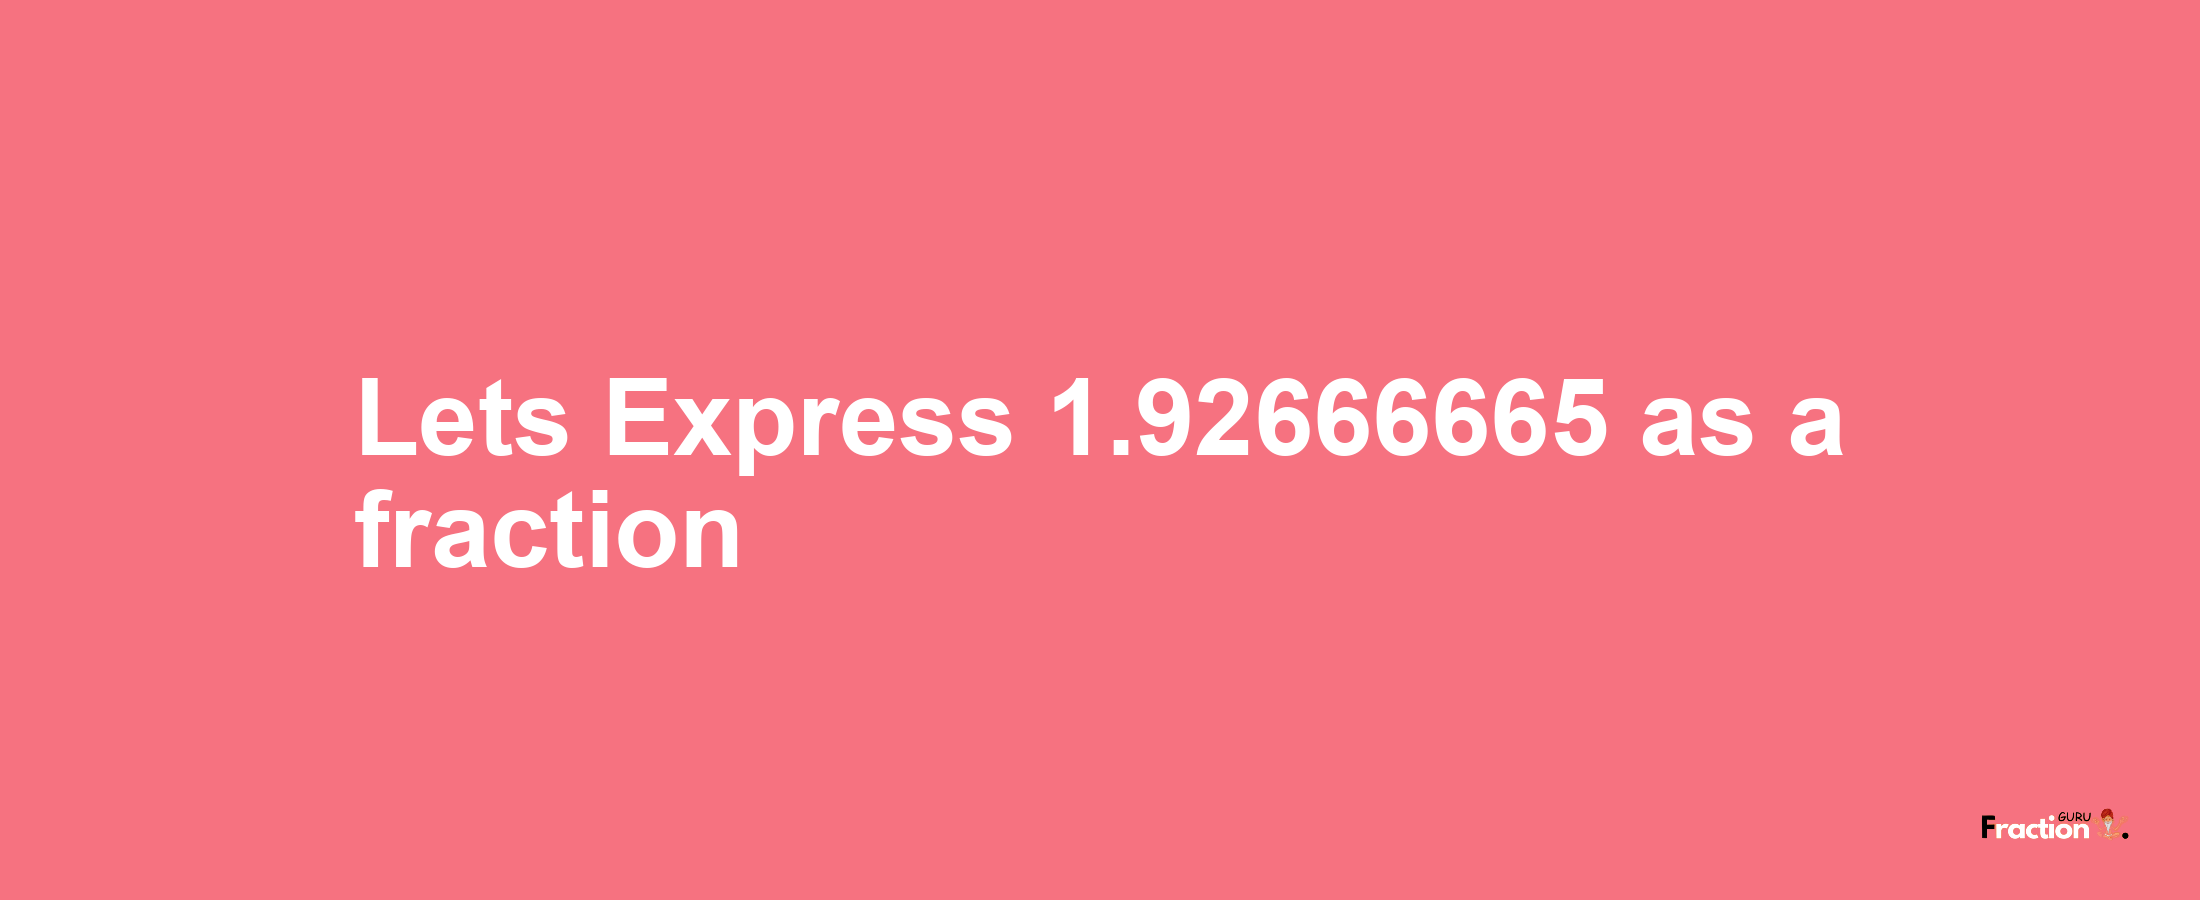 Lets Express 1.92666665 as afraction